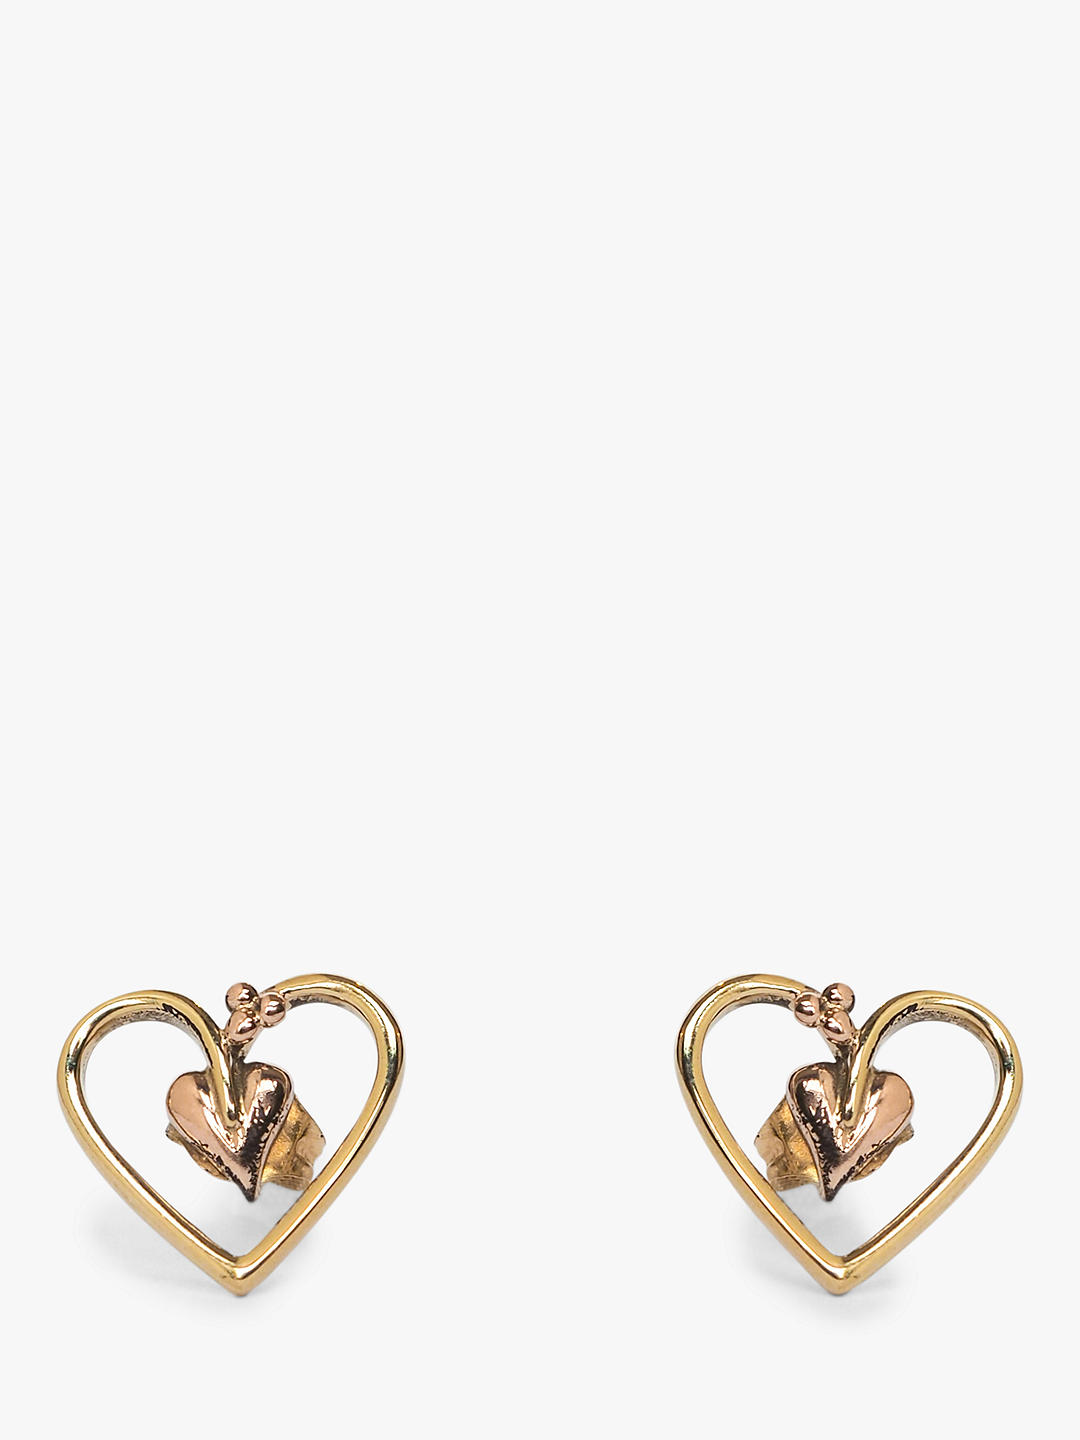 L & T Heirlooms Second Hand 9ct Yellow Gold Heart Stud Earrings, Gold